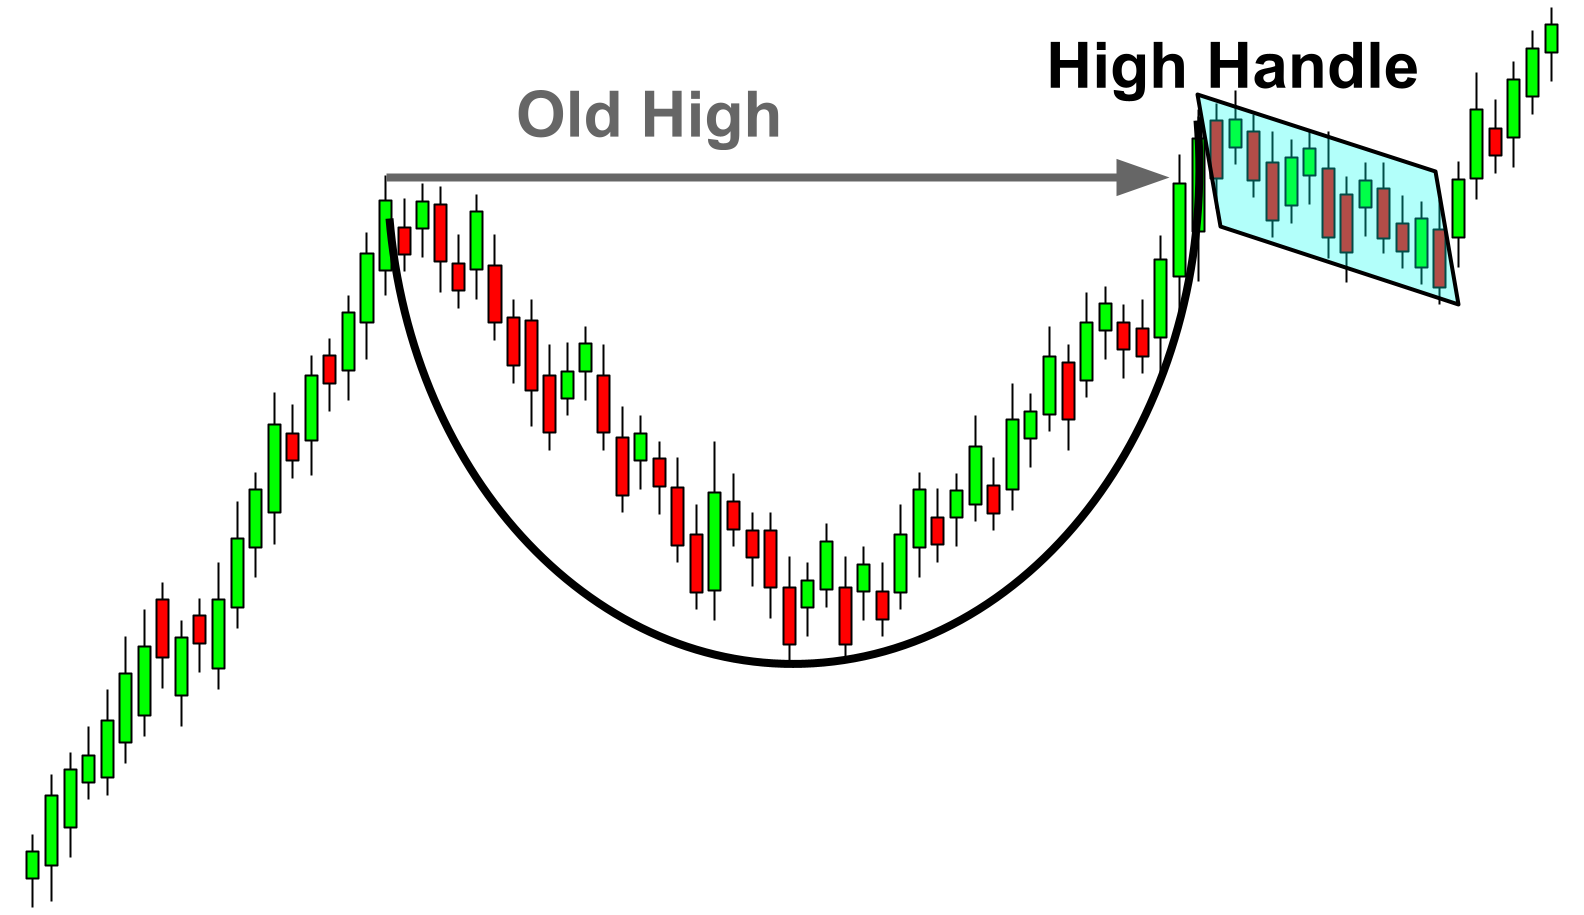 A complete cup and handle pattern formation